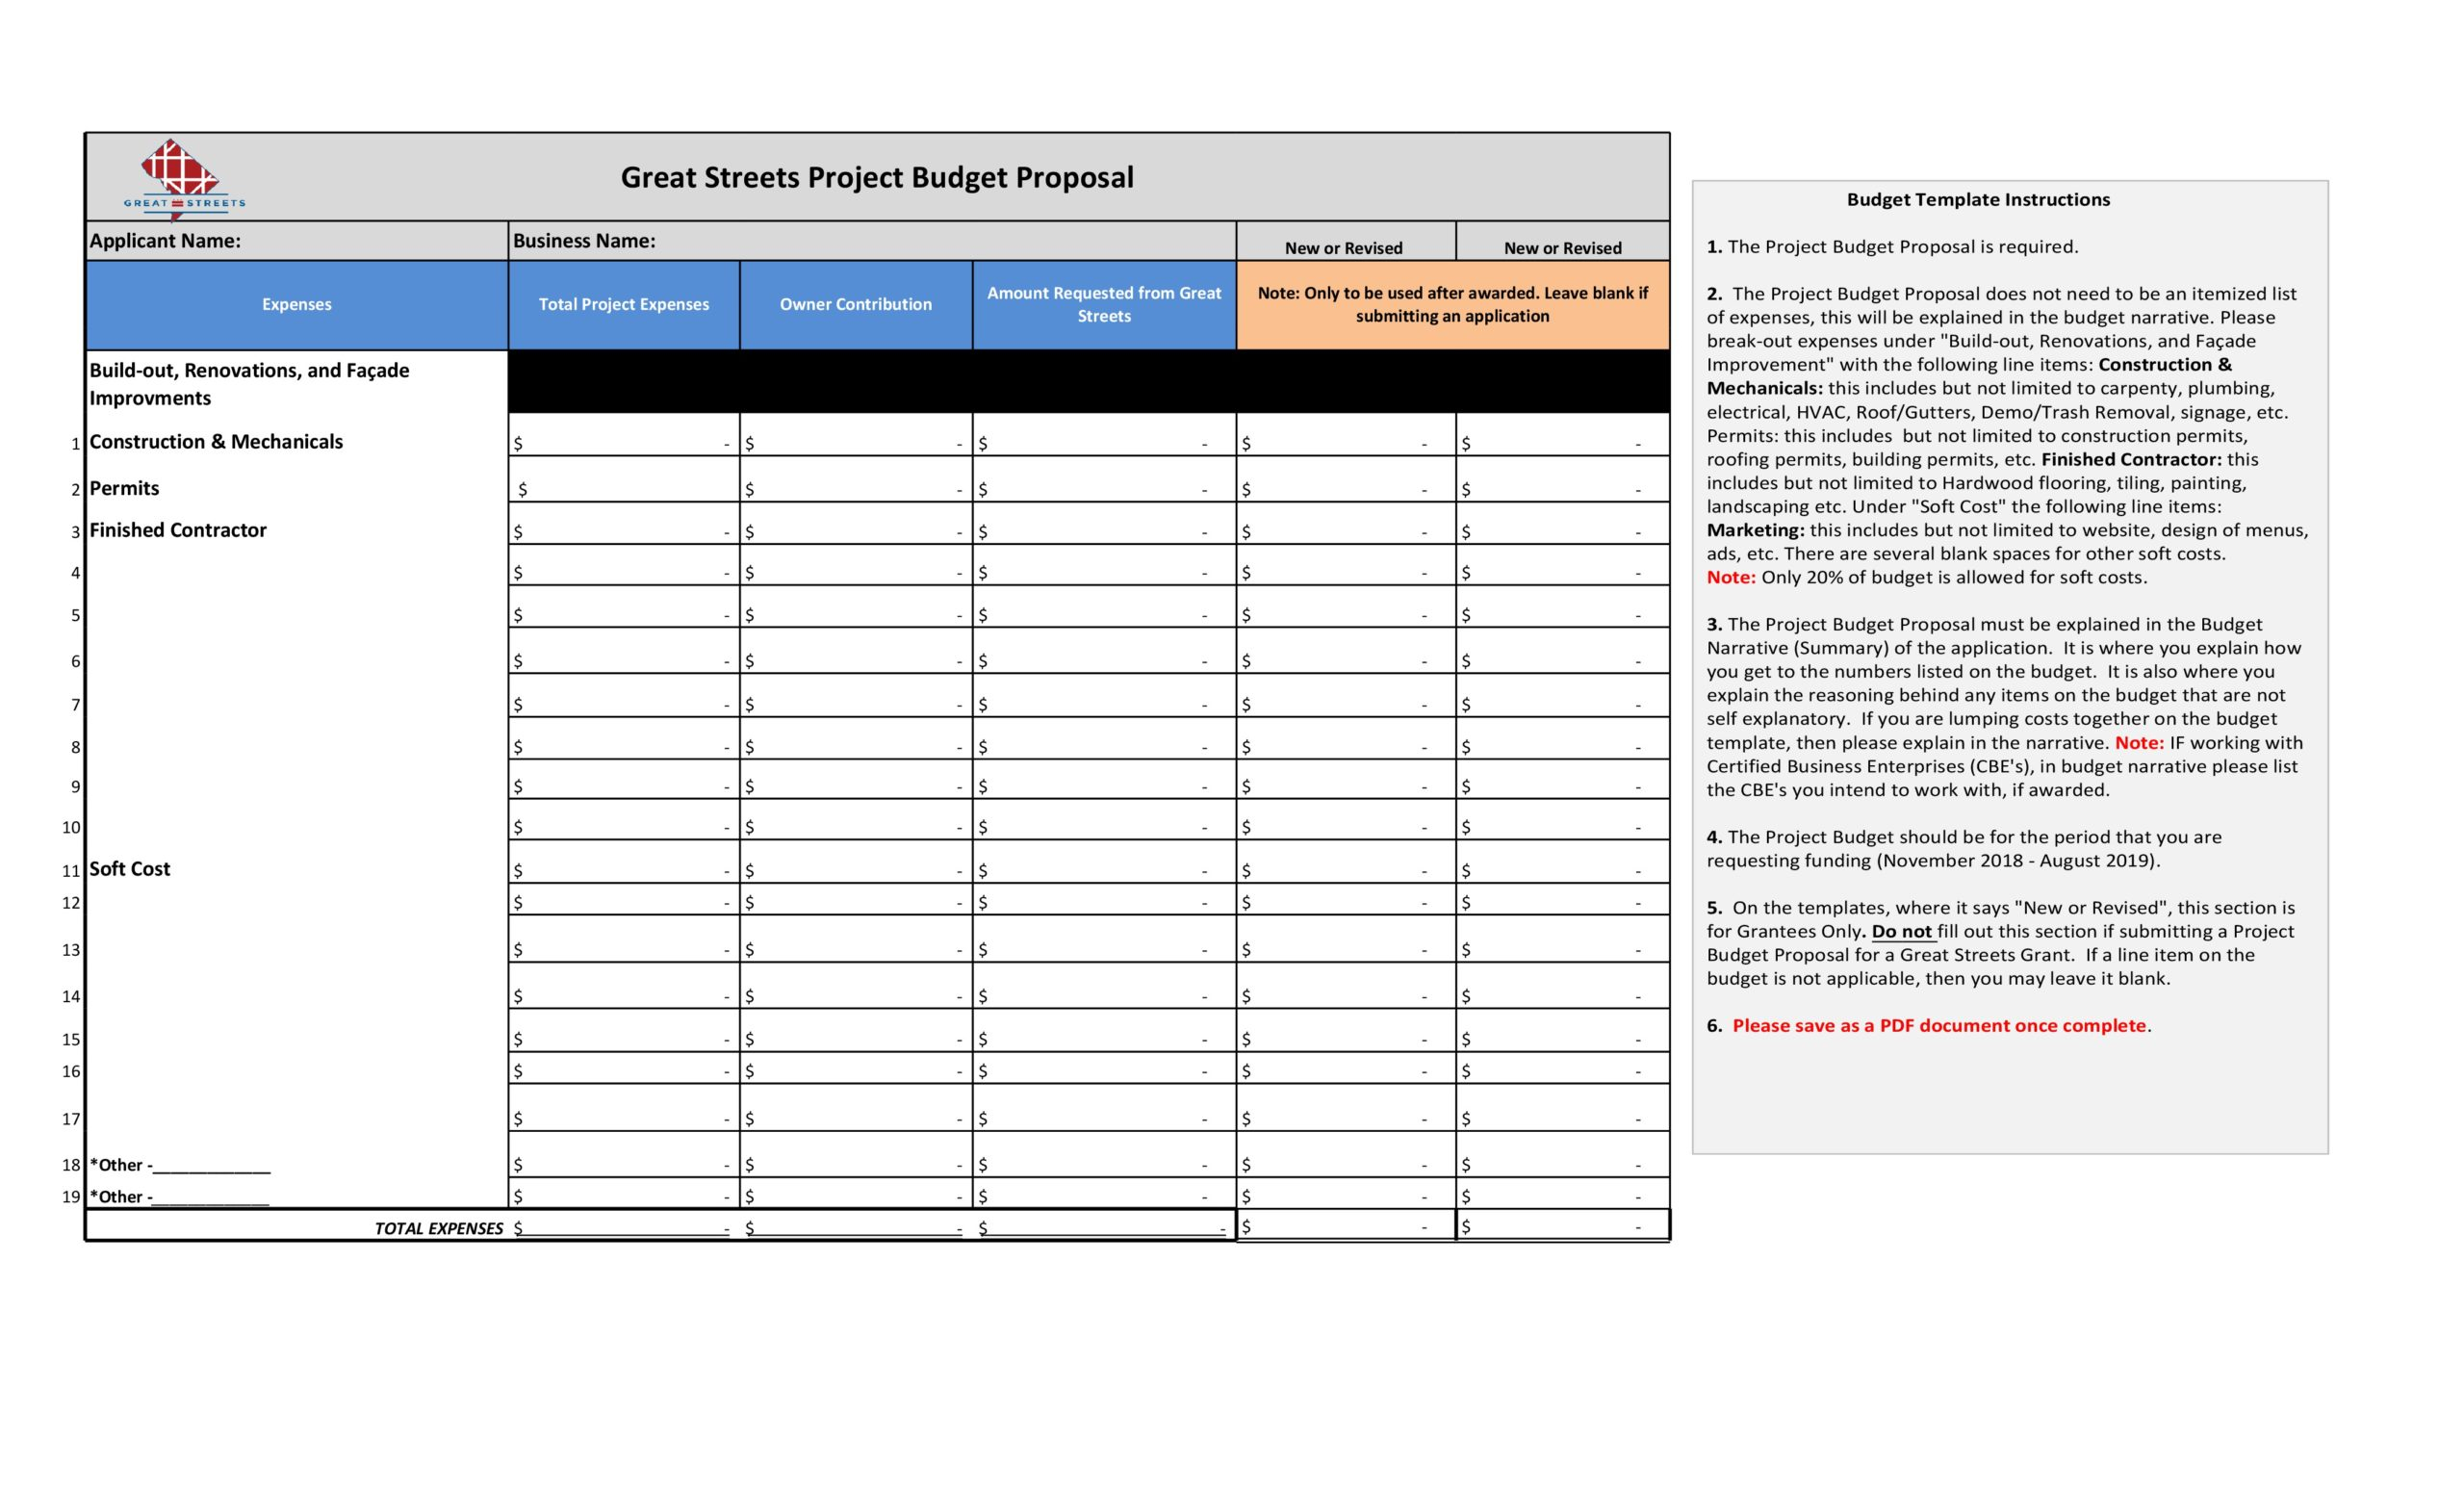 11 Free Budget Proposal Templates (Word & Excel) ᐅ TemplateLab For Grant Project Budget Template In Grant Project Budget Template